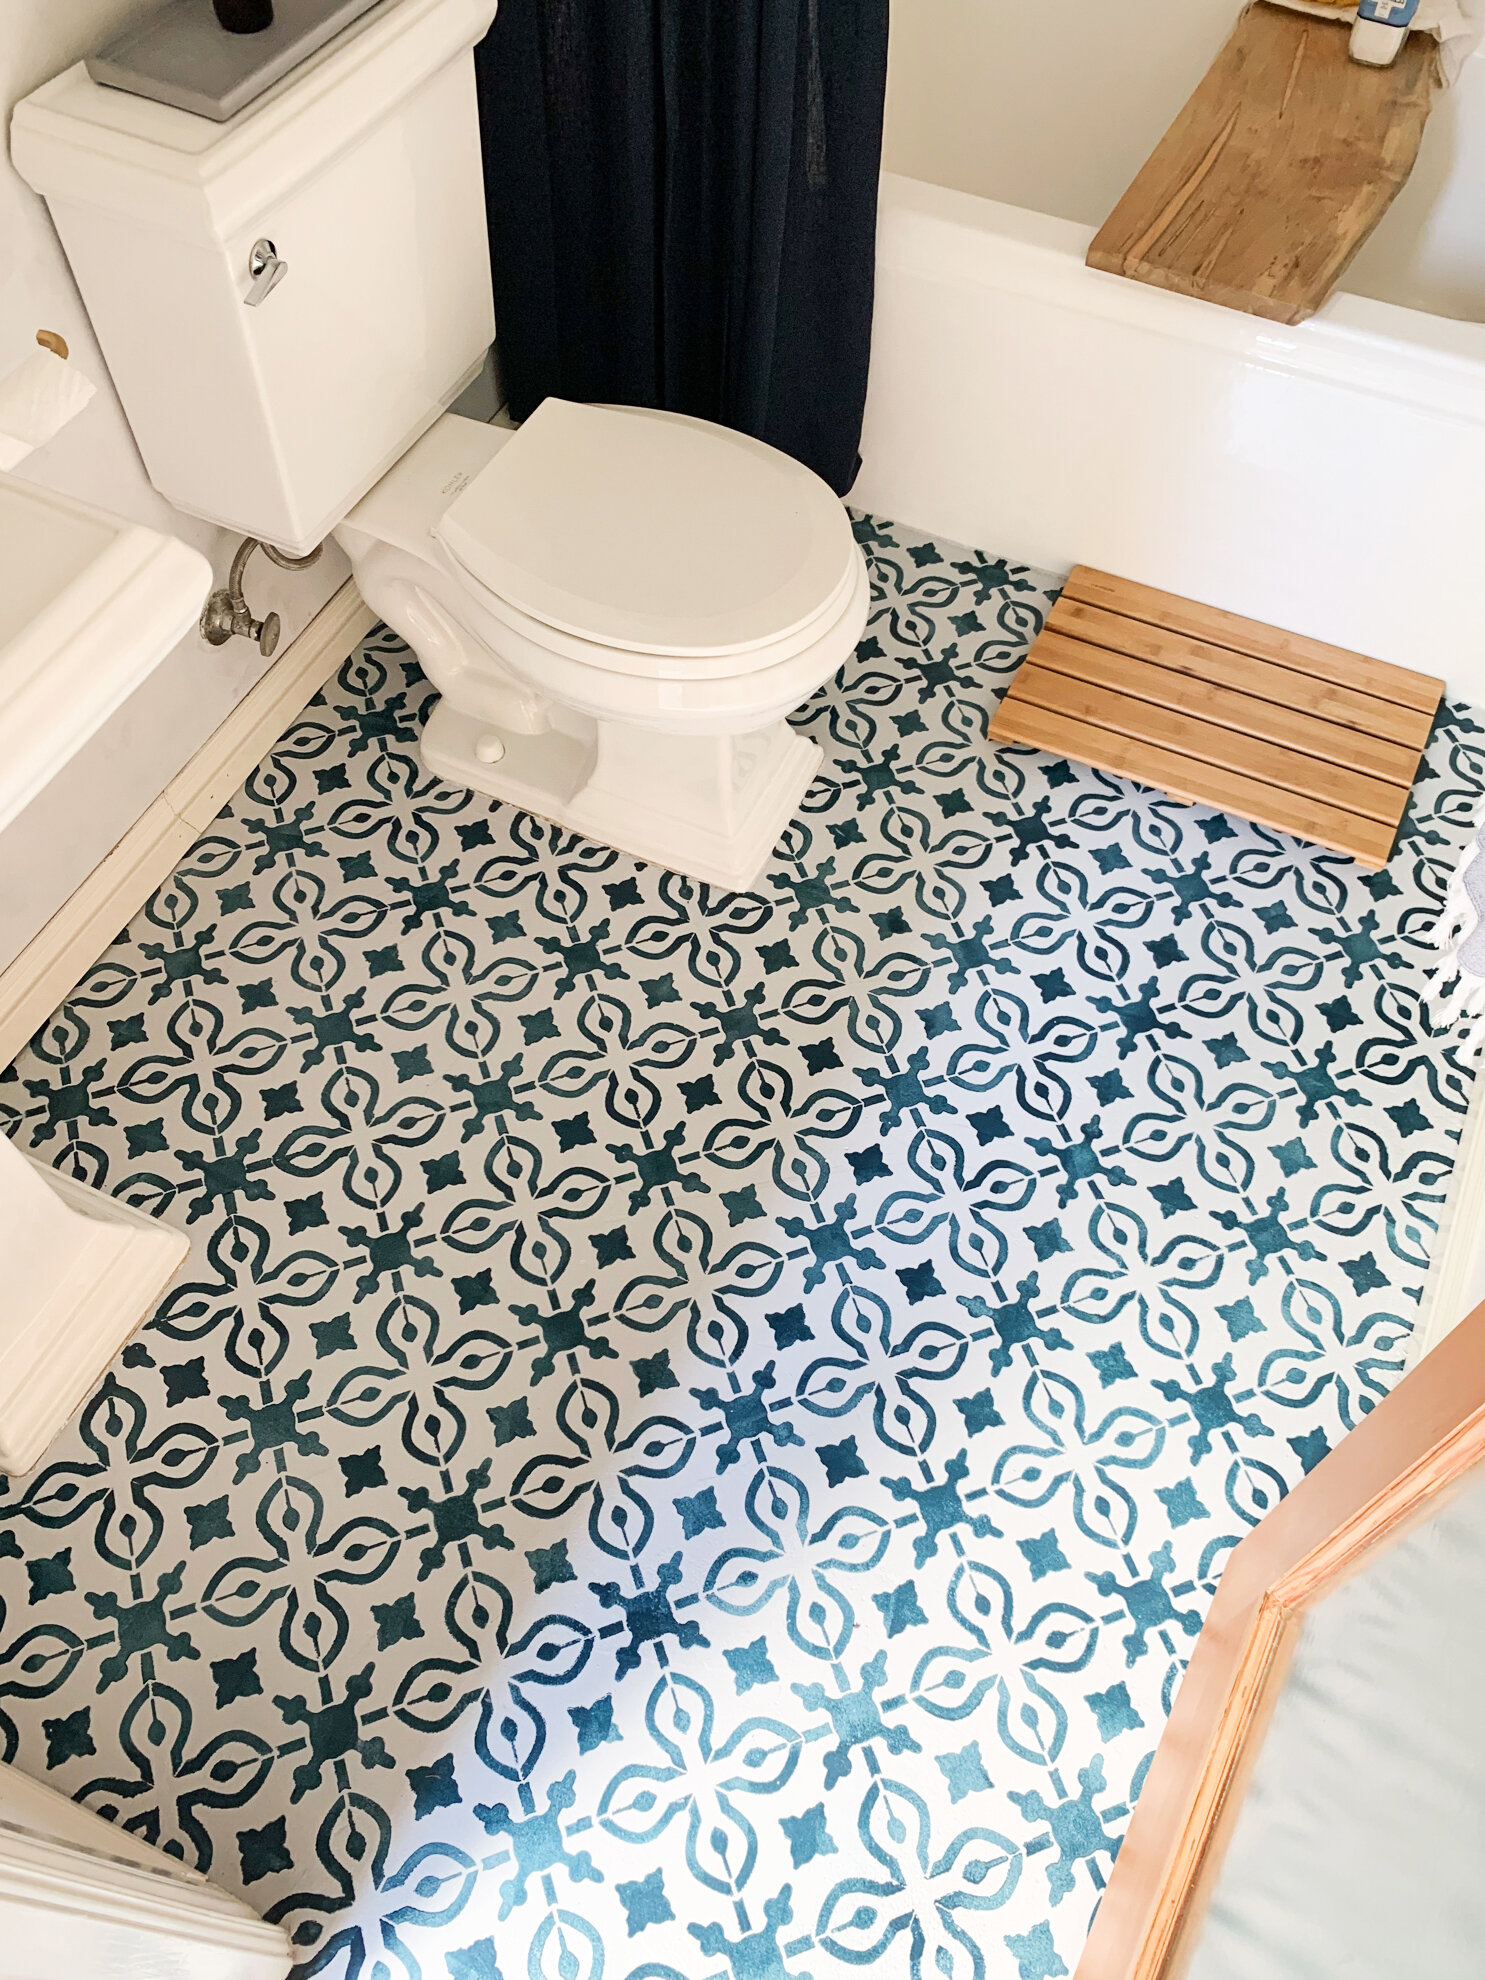  The bold patterened floors create the effect of a statement tile on a budget. 